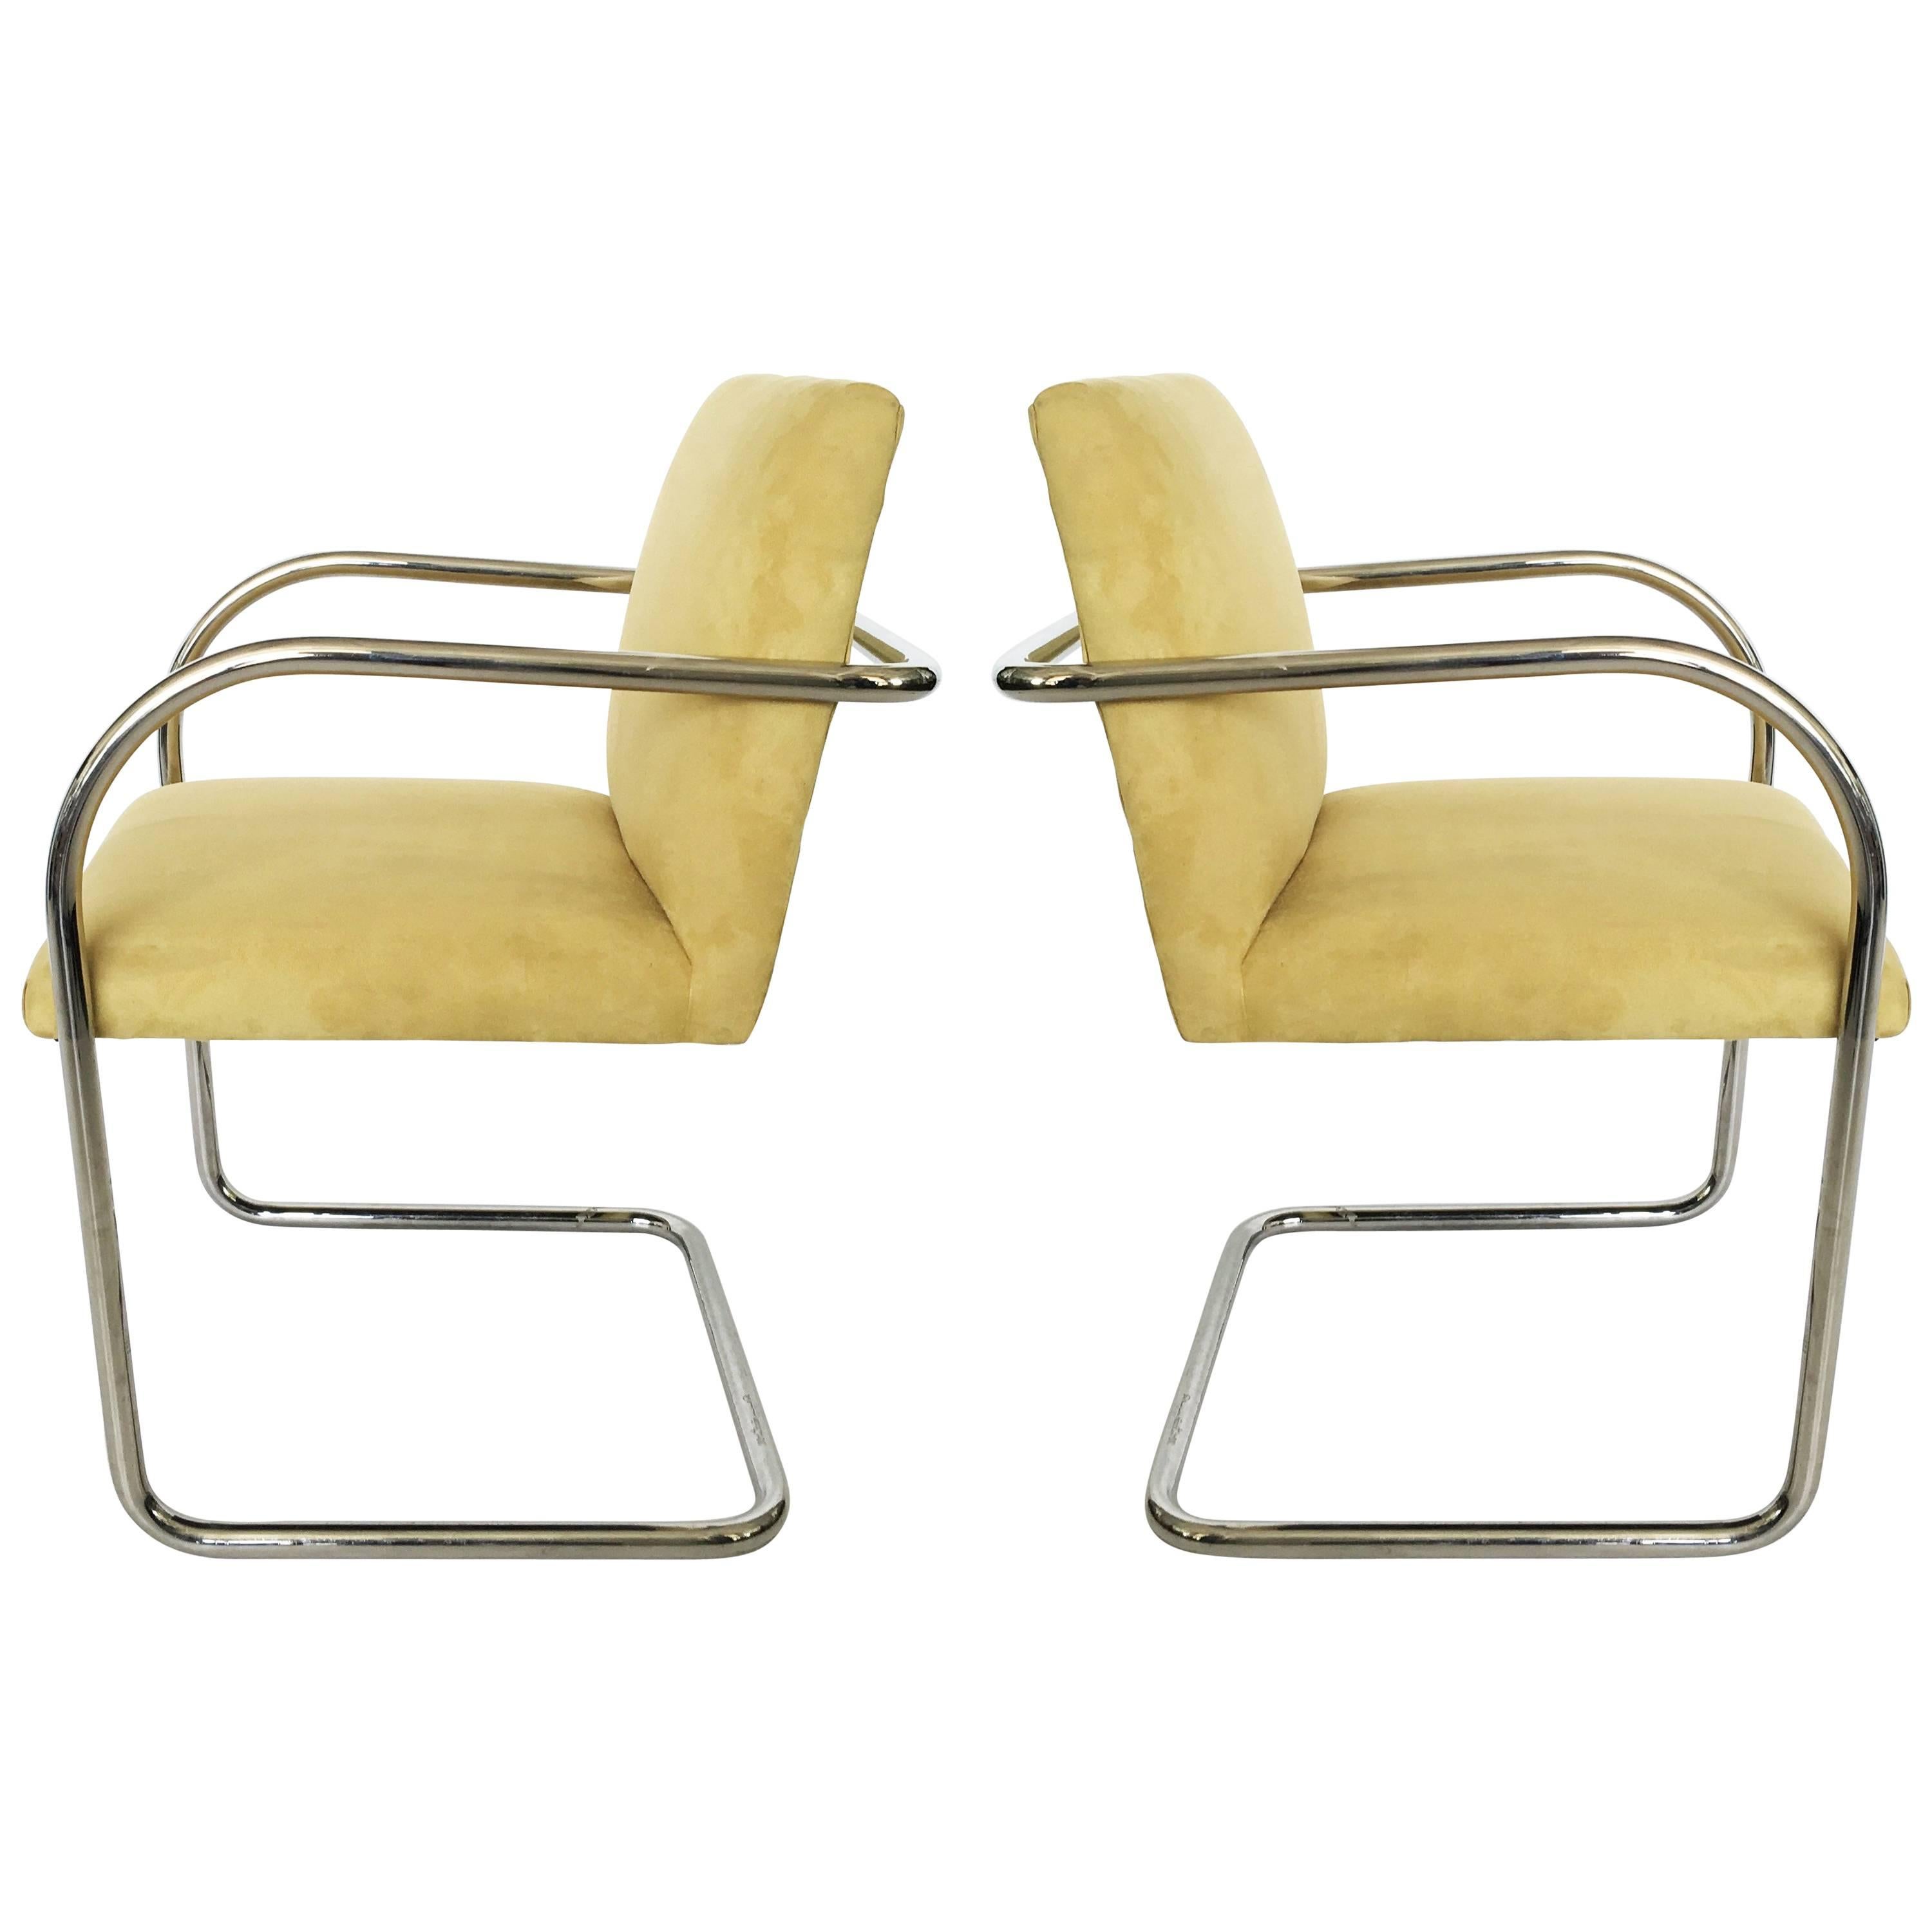 Pair of Suede Mies Van Der Rohe Tubular Brno Chairs by Knoll For Sale